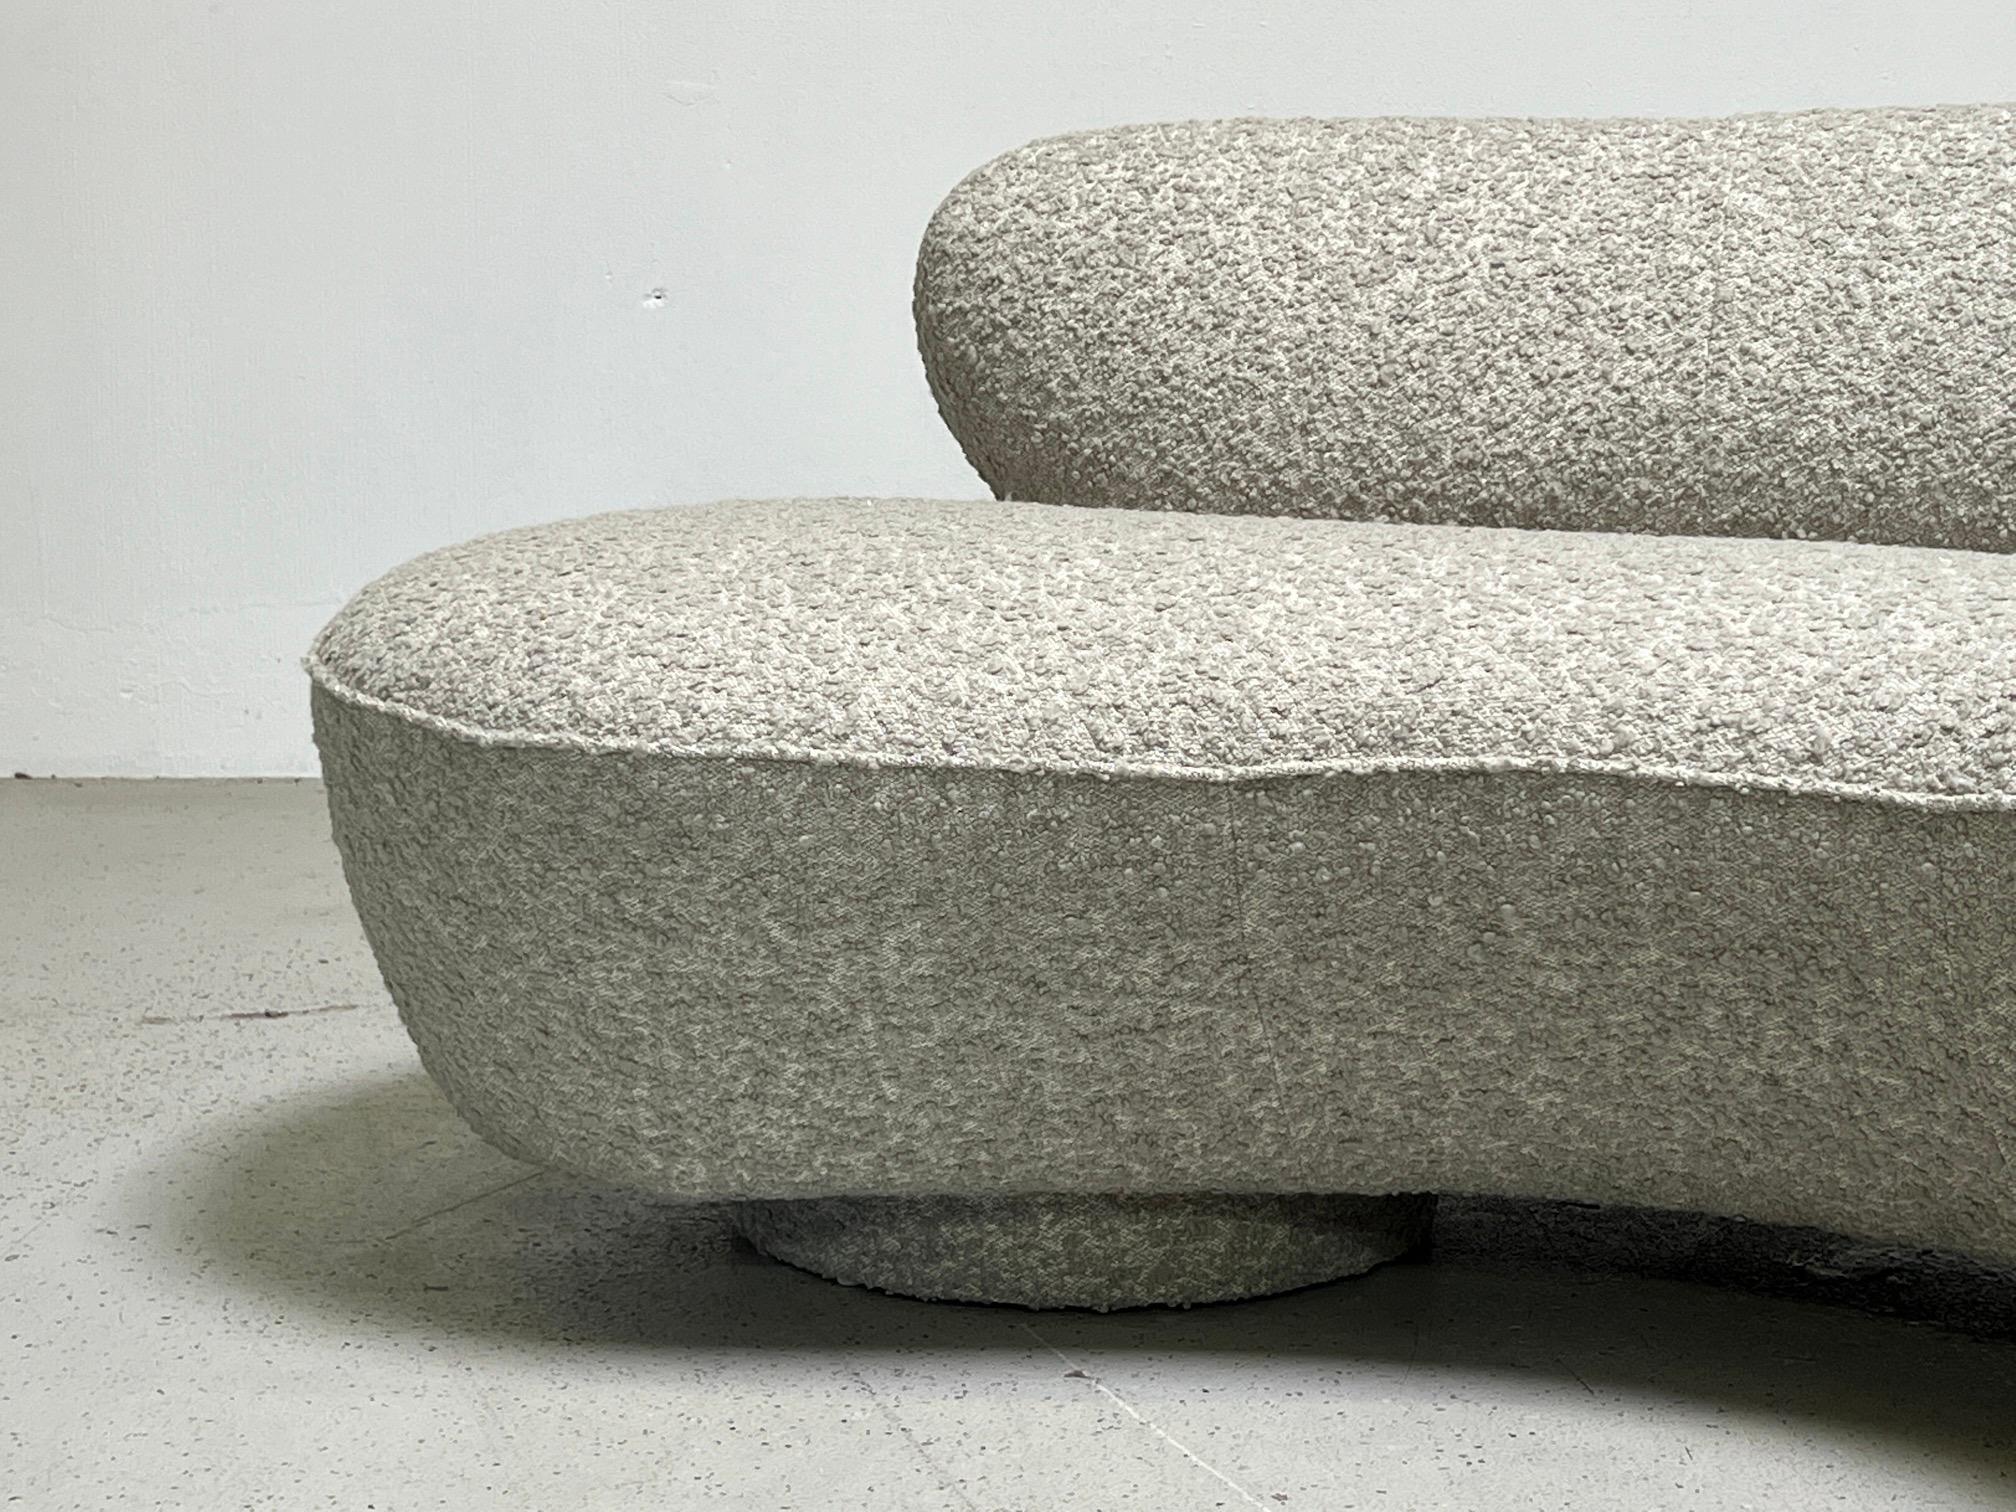 Pair of Sofas by Vladimir Kagan for Directional 10